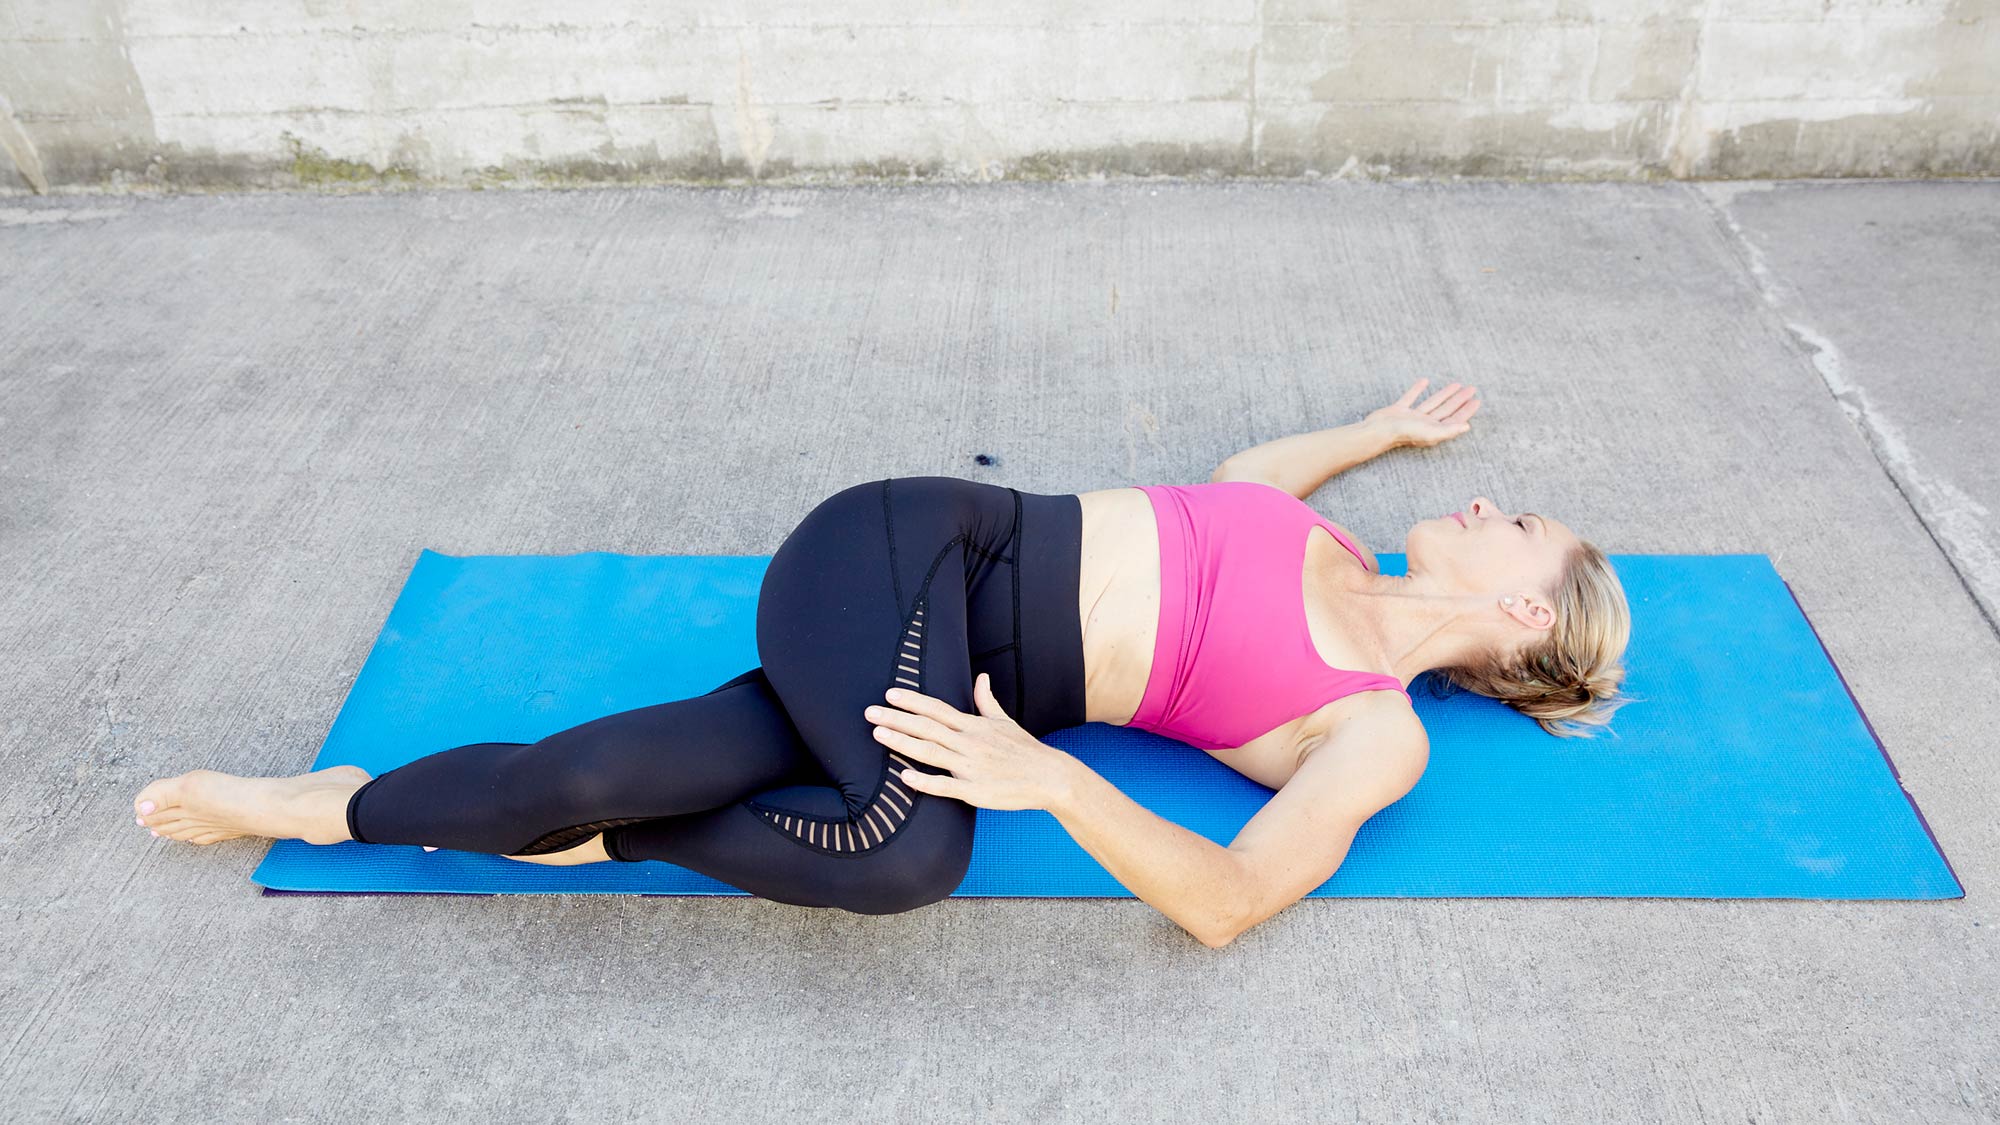 Yin Yoga Poses to Melt Tension, Restore Health, and Revive Your Spirit